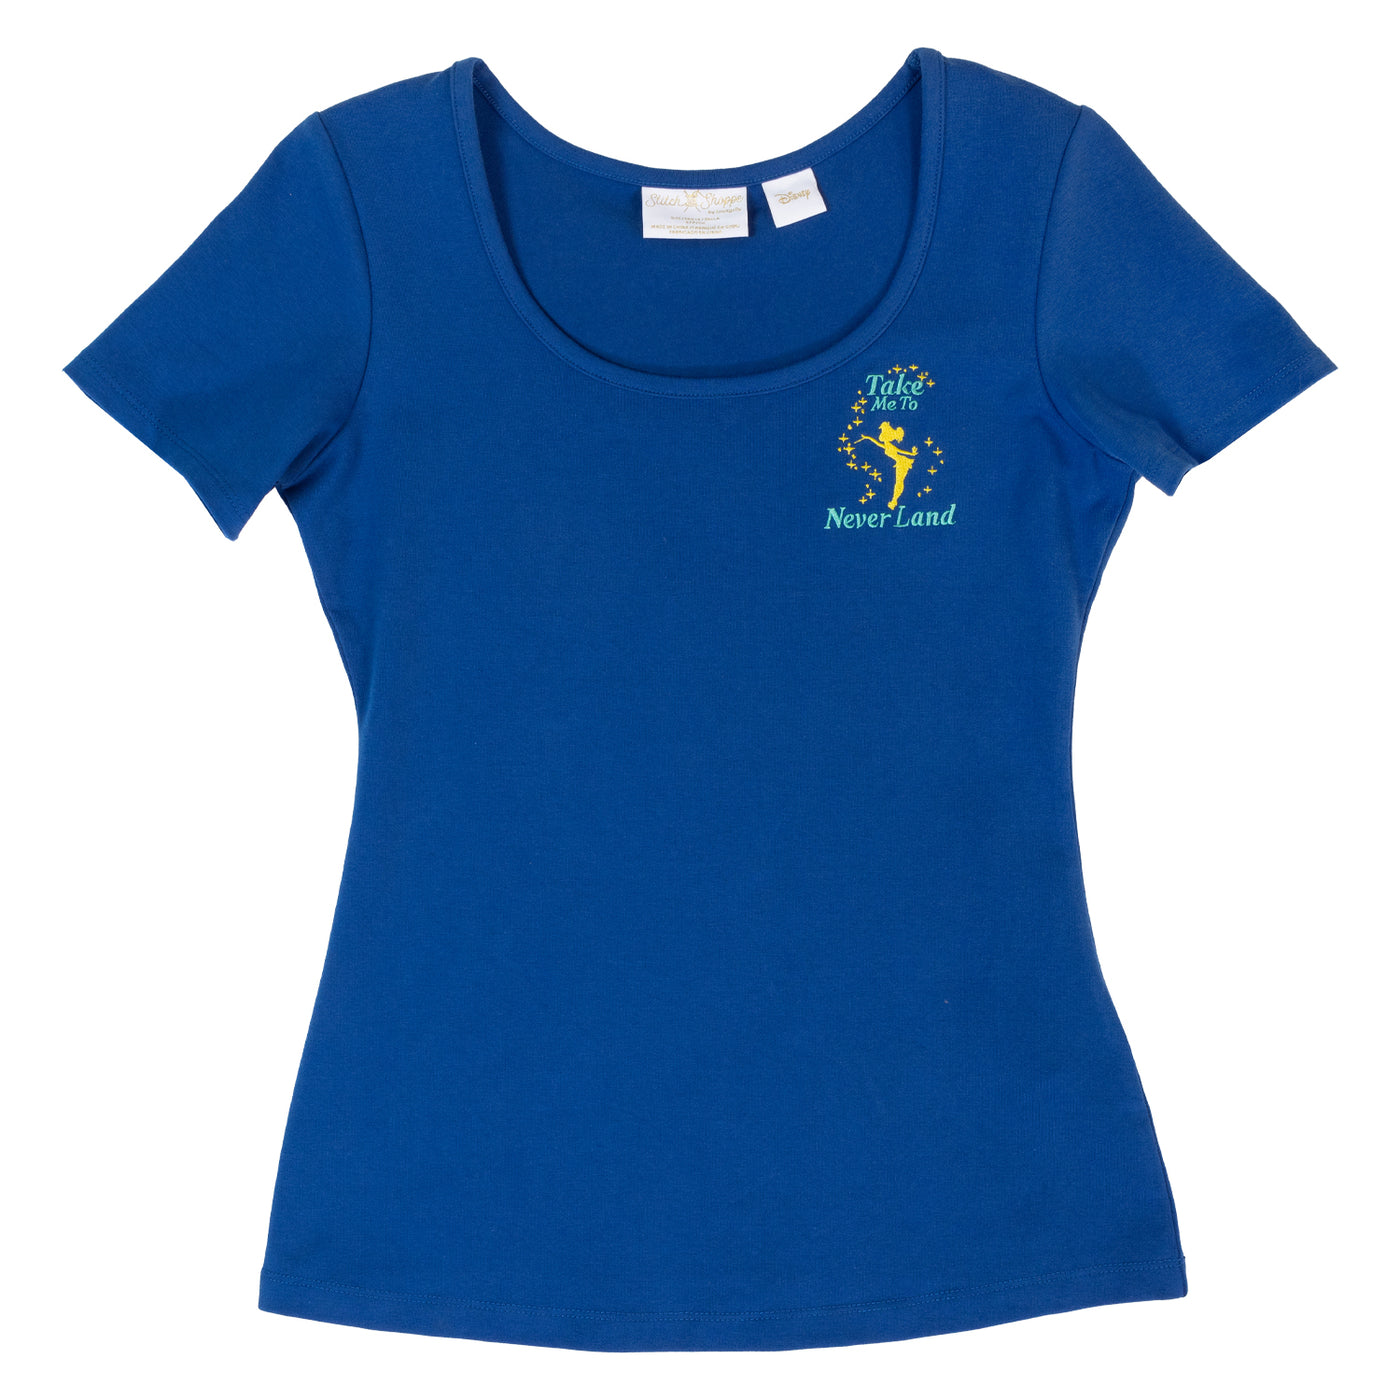 Stitch Shoppe by Loungefly Disney Peter Pan Tinkerbell "Kelly" Fashion Top Shirt